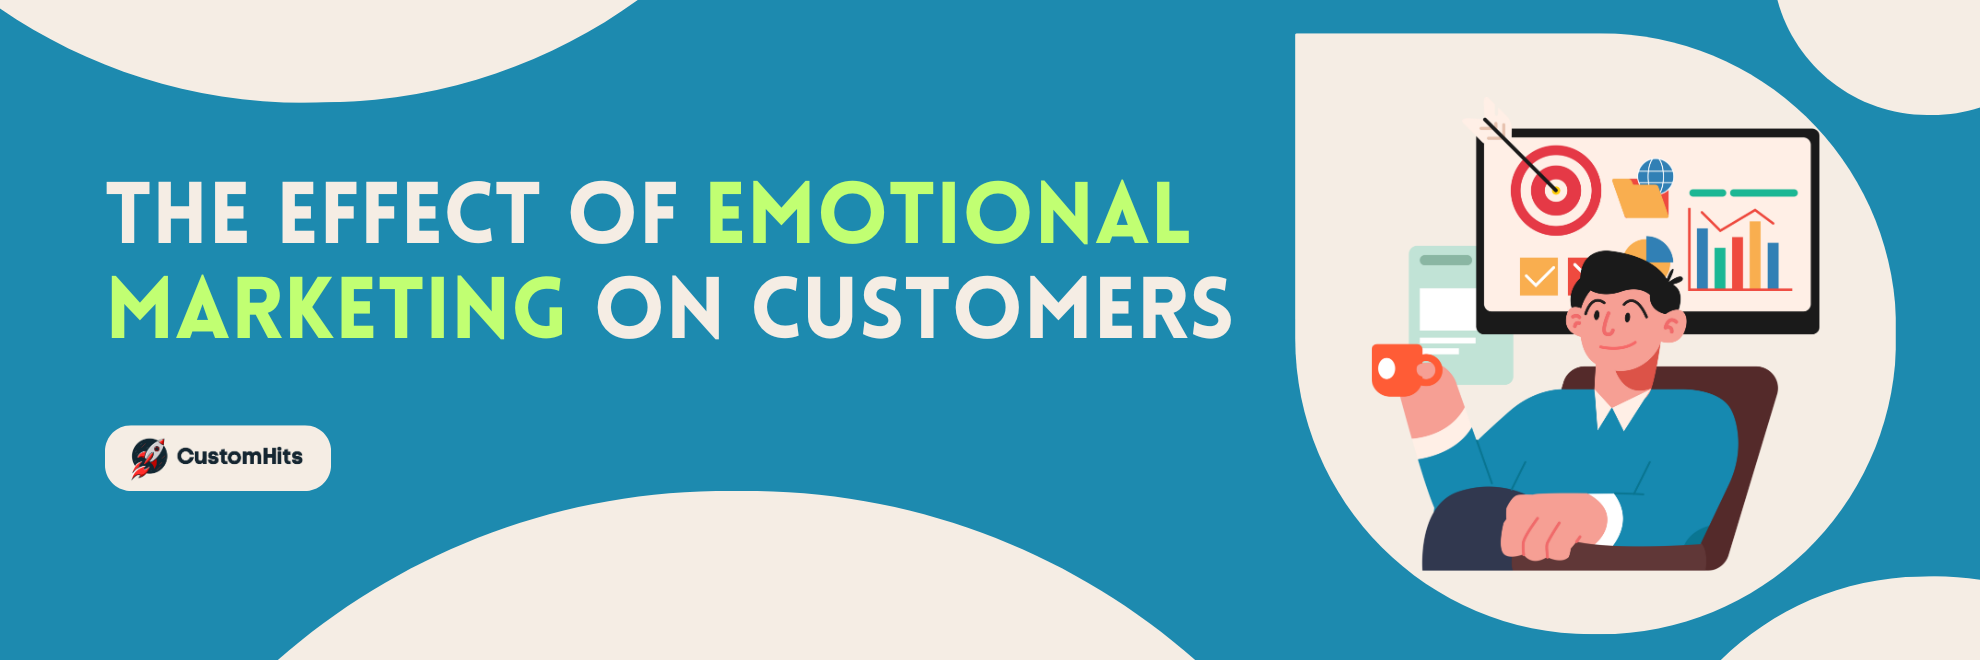 The Effect of Emotional Marketing on Customers